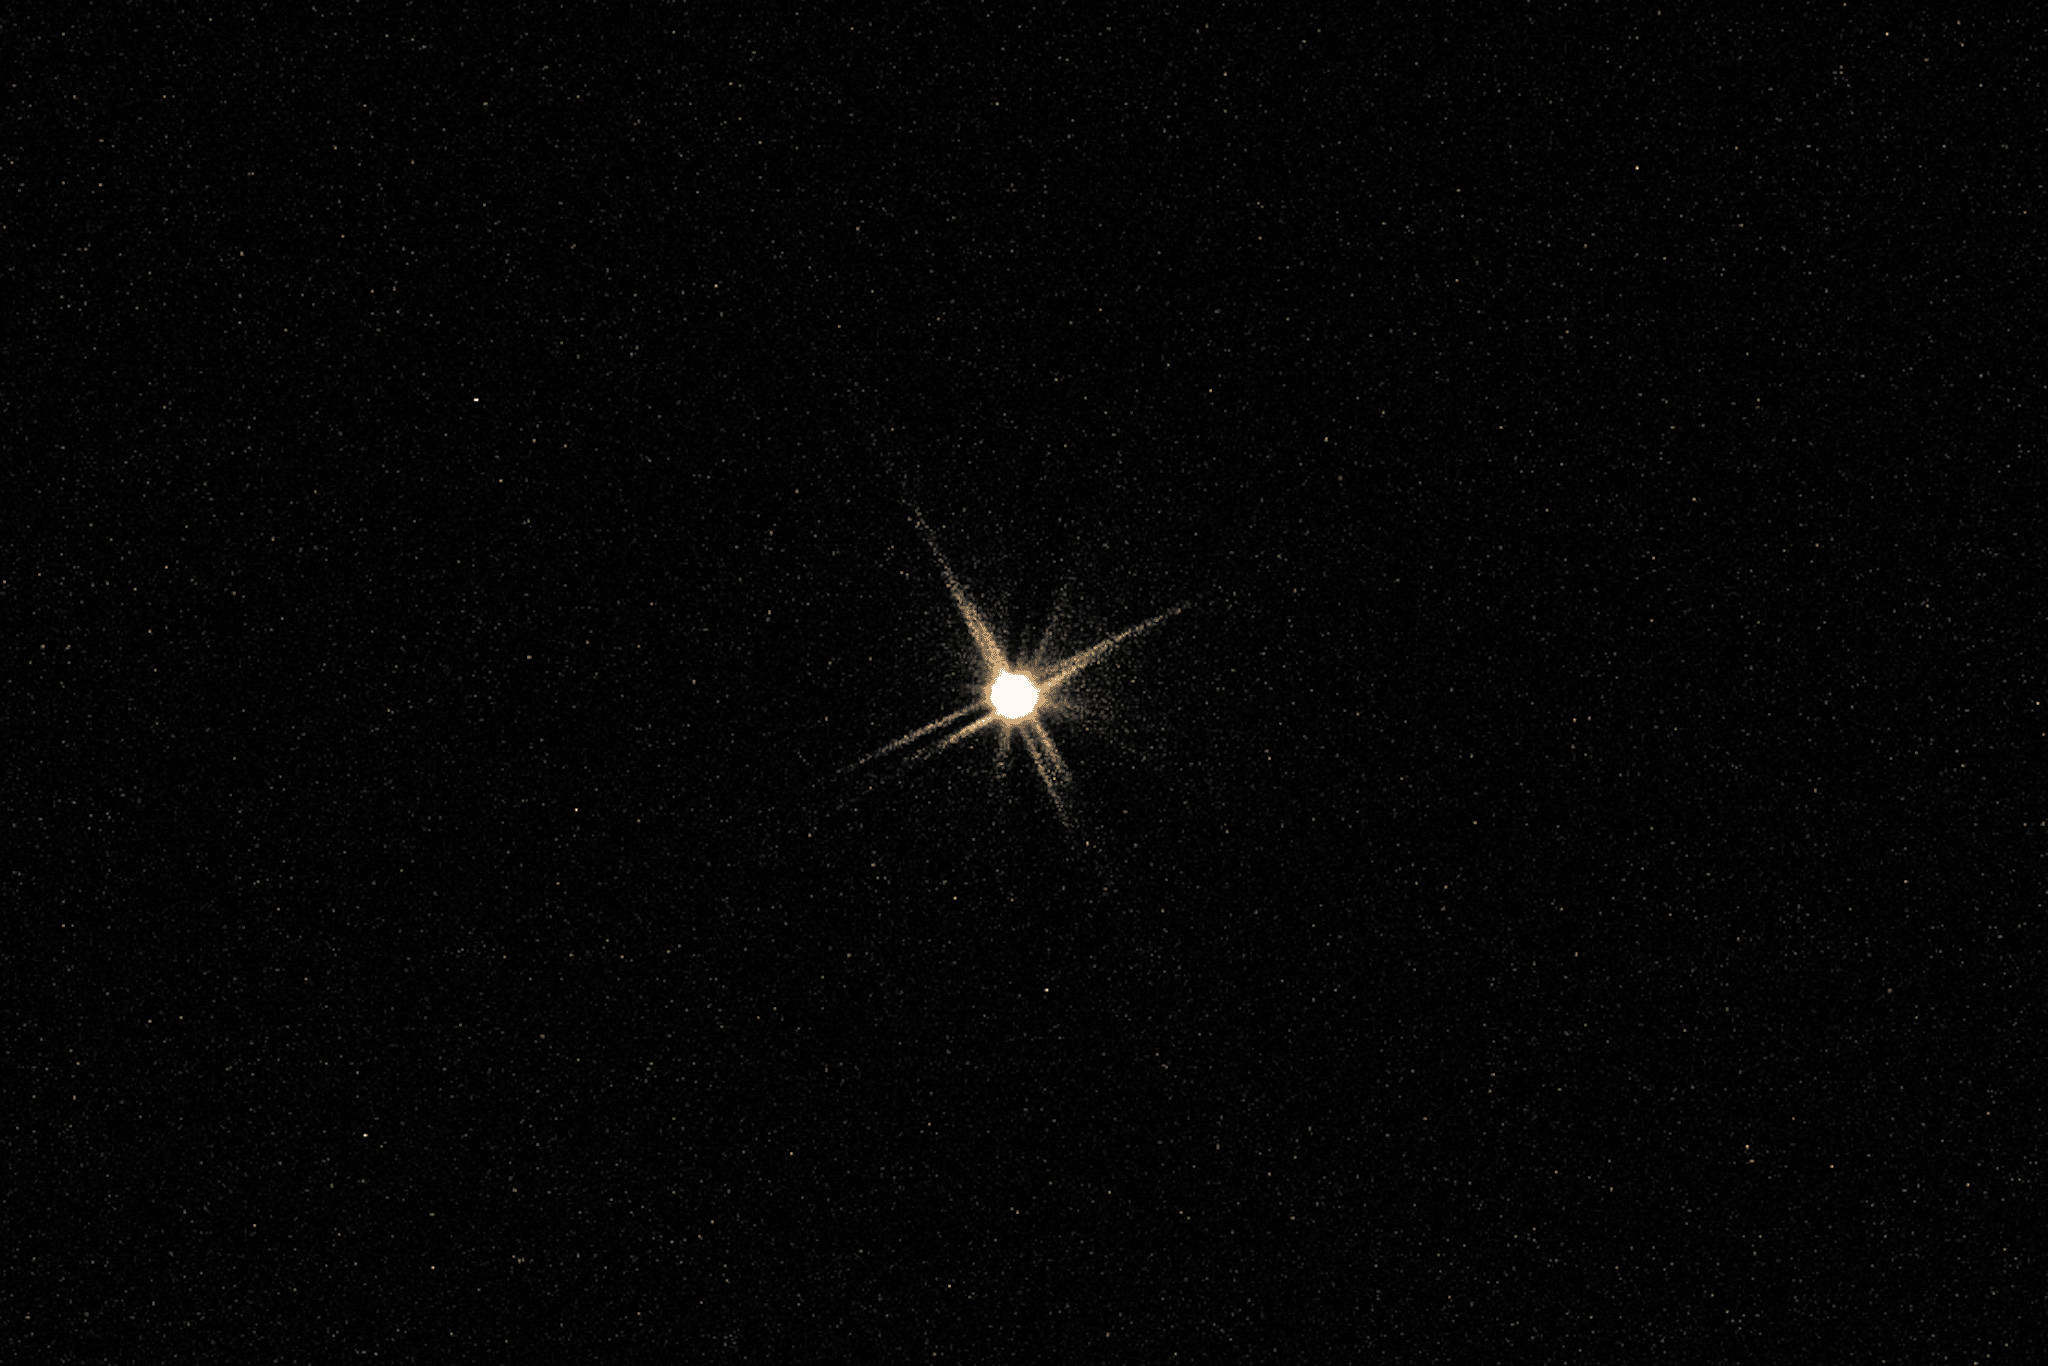 A 1/4 second exposure of the star Vega (I think?) and lots of surrounding stars.